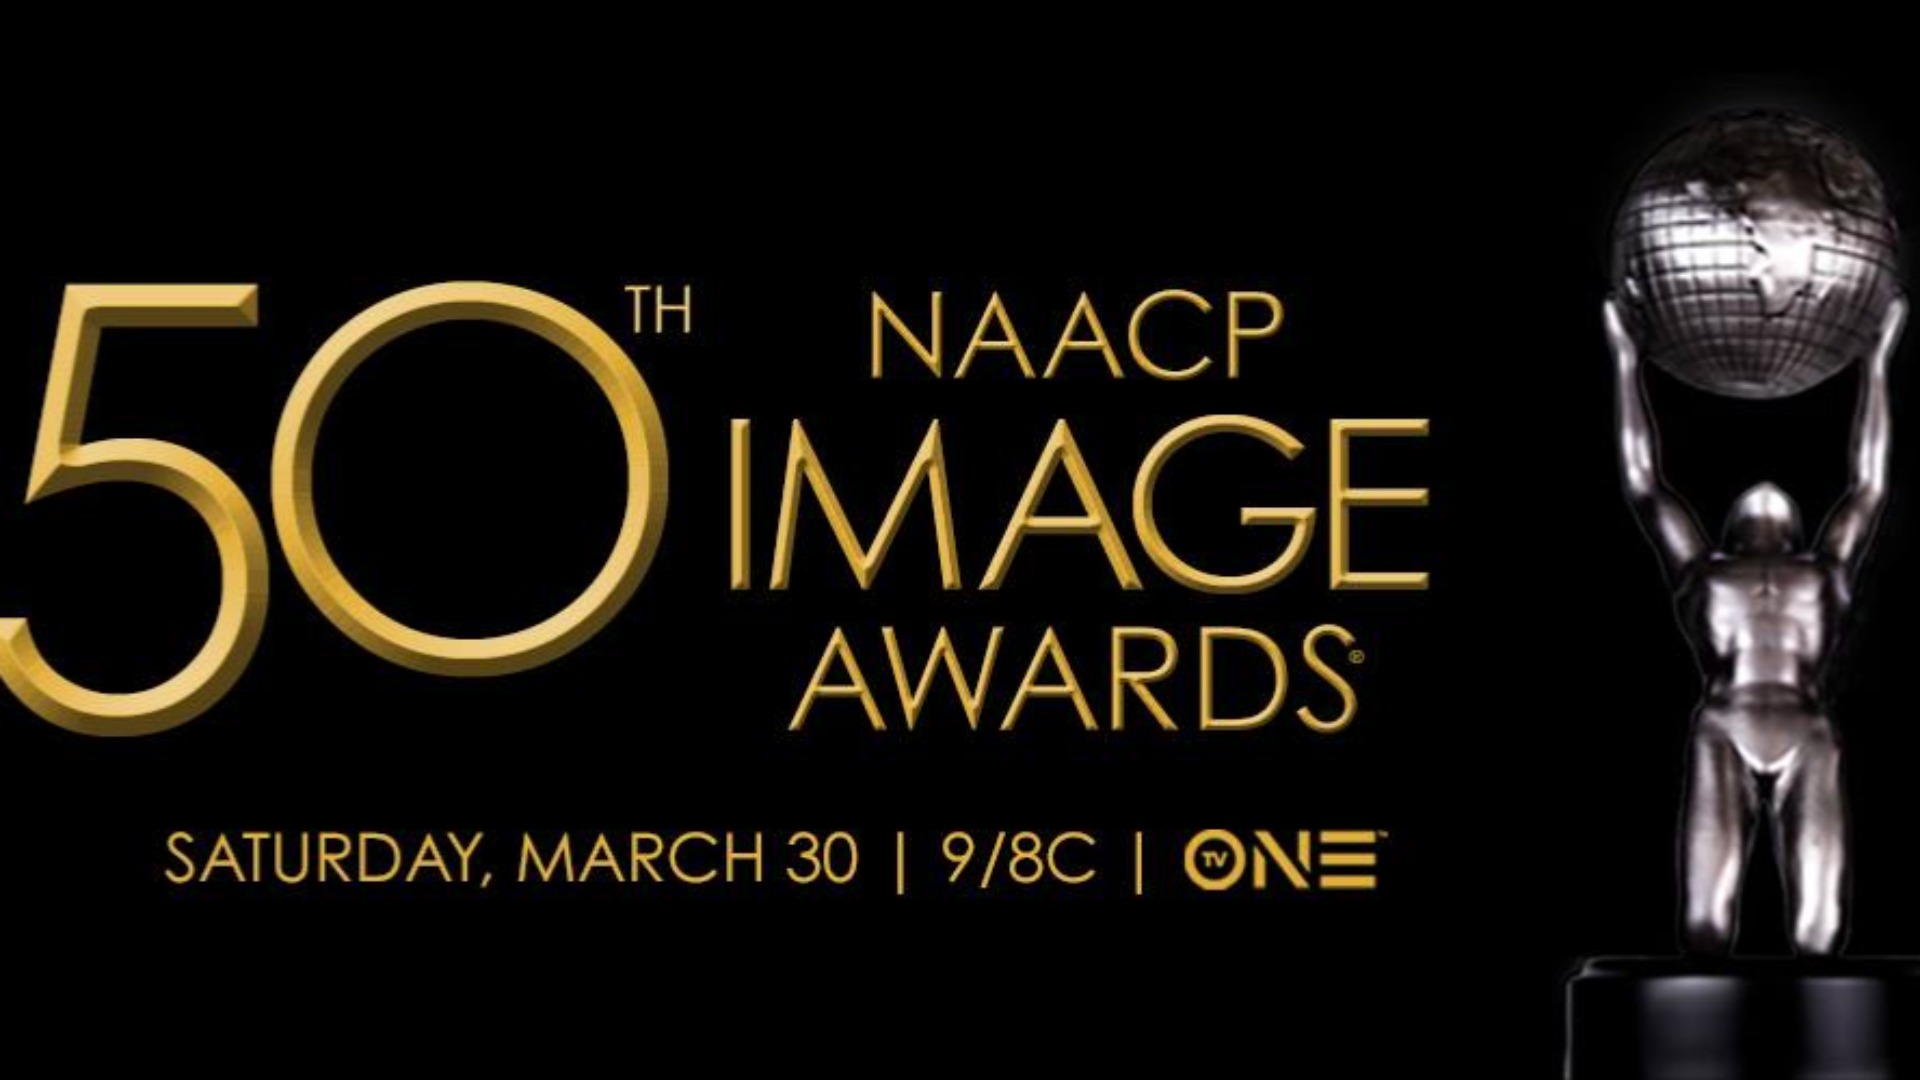 The NAACP Image Award is an annual awards ceremony presented by the U.S.-based National Association for the Advancement of Colored People (NAACP) to honor outstanding African Americans[citation needed] in film, television, music, and literature.[1] Similar to other awards, like the Oscars and the Grammys, the over 40 categories of the Image Awards are voted on by the award organization's members (in this case, NAACP members). Honorary awards (similar to the Academy Honorary Award) have also been included, such as the President's Award, the Chairman's Award, the Entertainer of the Year, and the Hall of Fame Award.Wikipedia